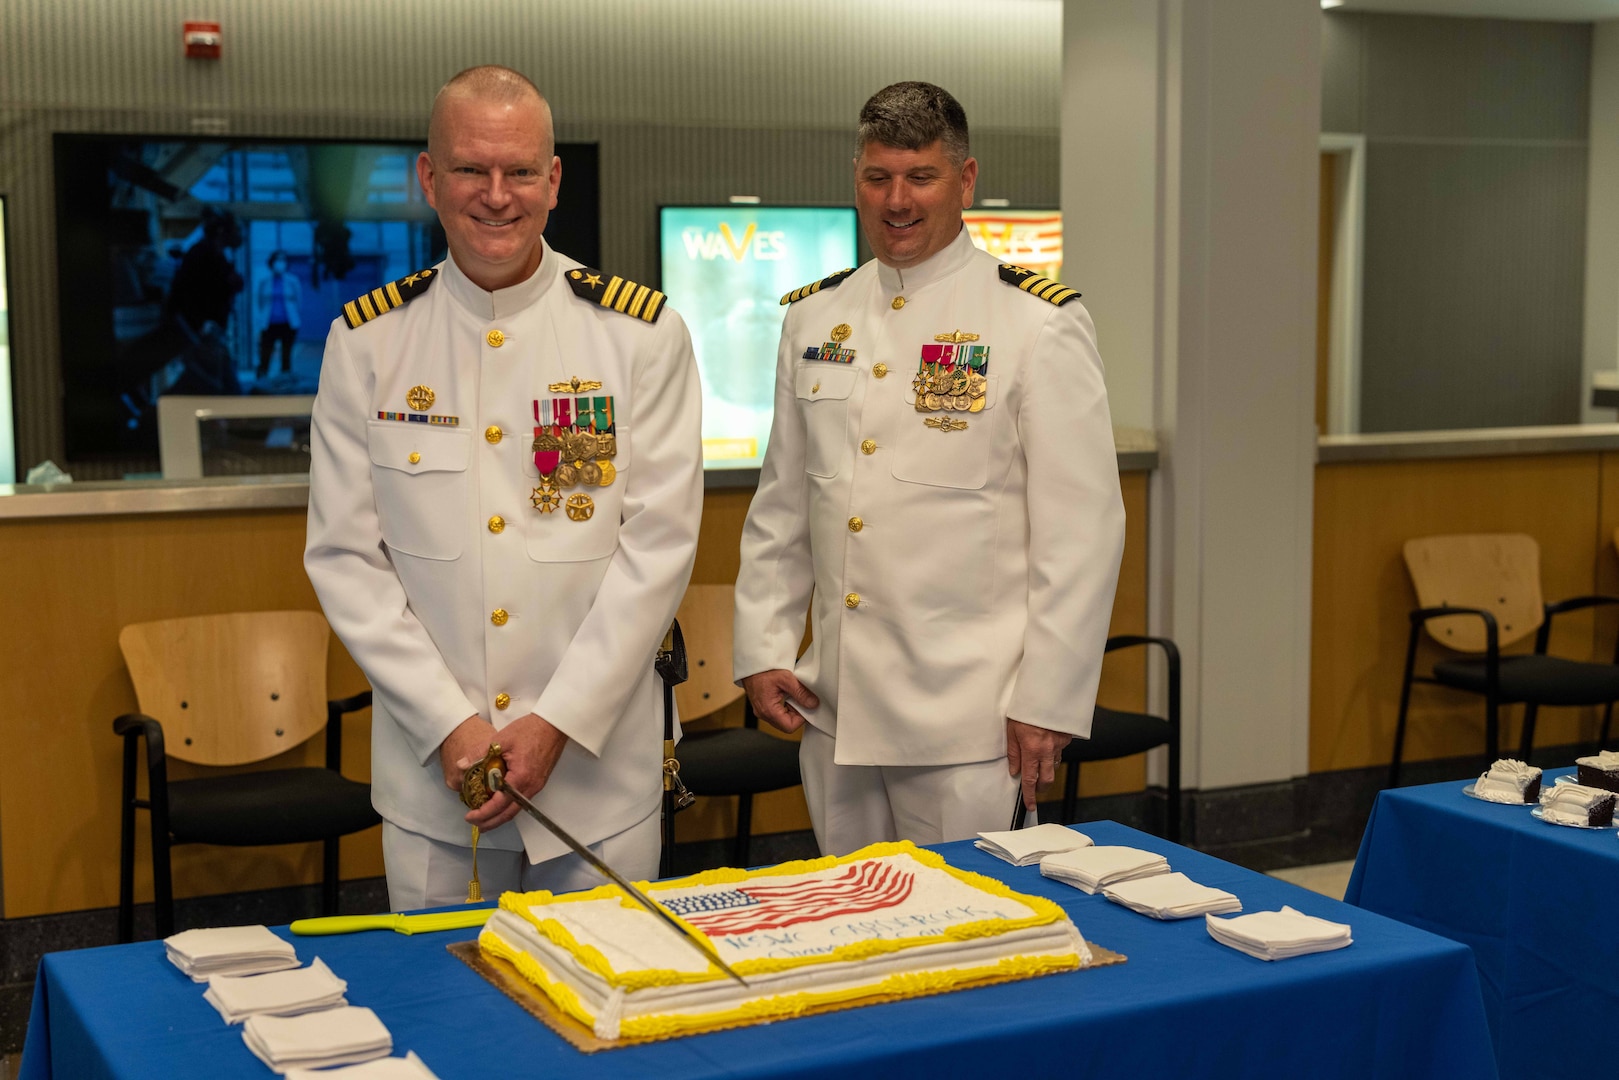 Naval Surface Warfare Center, Carderock Division’s outgoing Commanding Officer, Capt. Todd E. Hutchison (left), prepares to cut the cake while Carderock’s incoming Commanding Officer, Capt. Matthew Tardy, watches on during a change-of-command ceremony held in West Bethesda, Md., on May 12. (U.S. Navy photo by Aaron Thomas)